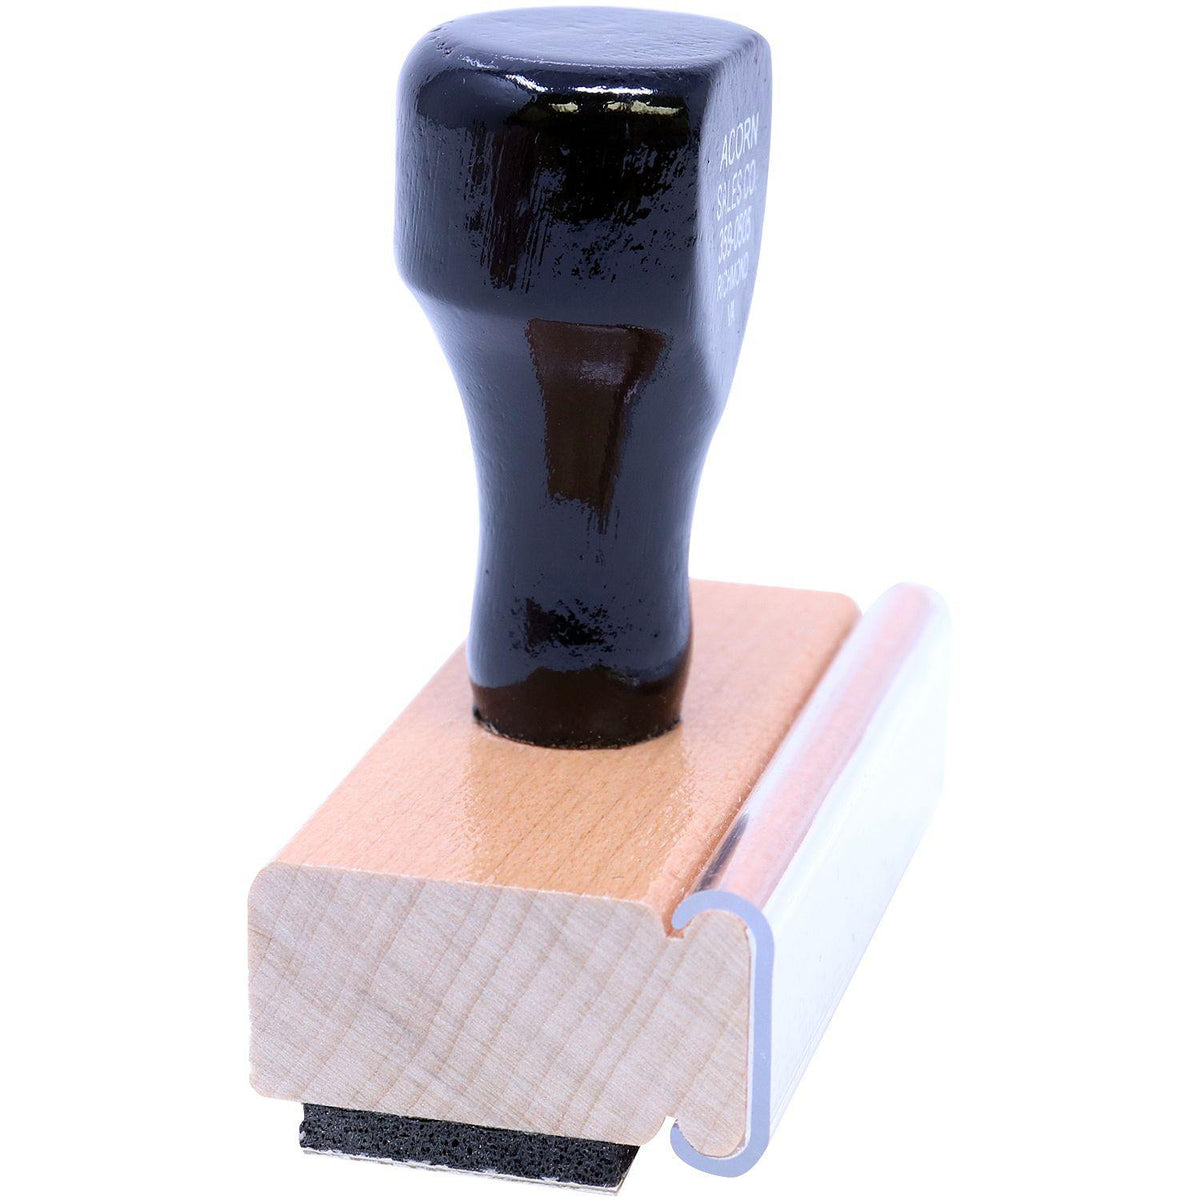 Side View of Spoiled Rubber Stamp at an Angle